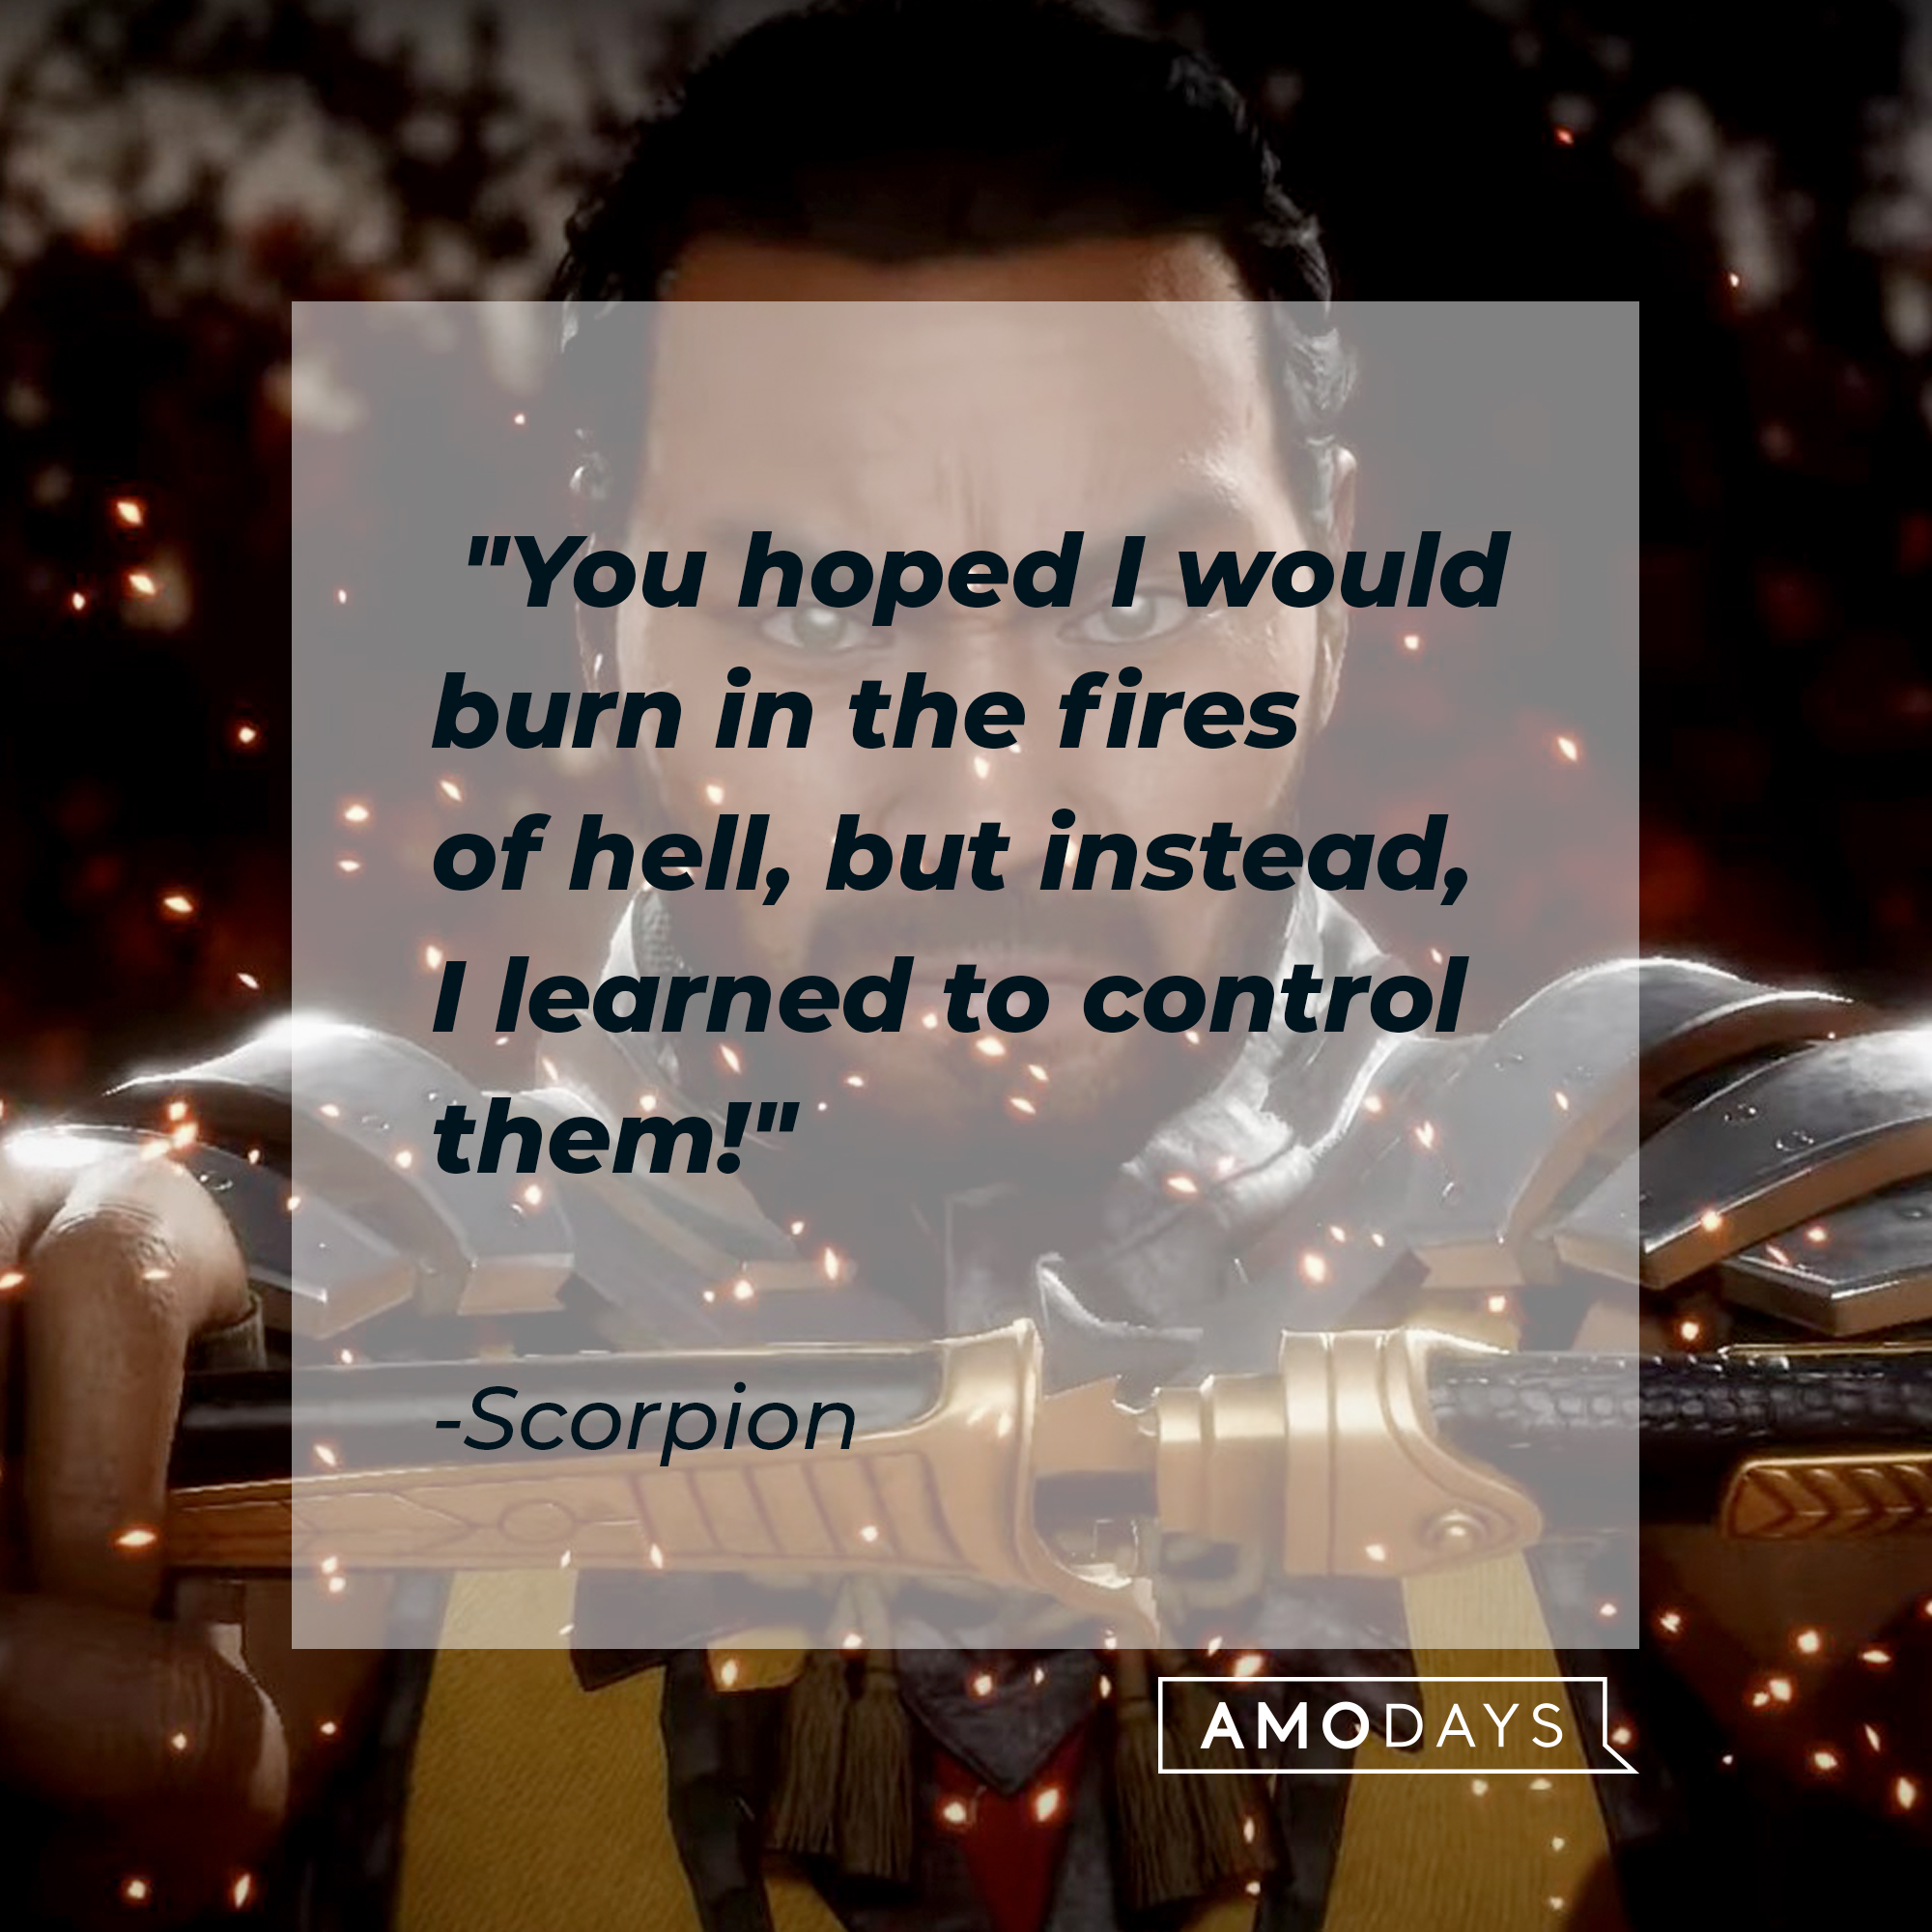 An image of Scorpion with his quote:"You hoped I would burn in the fires of hell, but instead, I learned to control them!"  |Source: facebook.com/MortalKombatUK